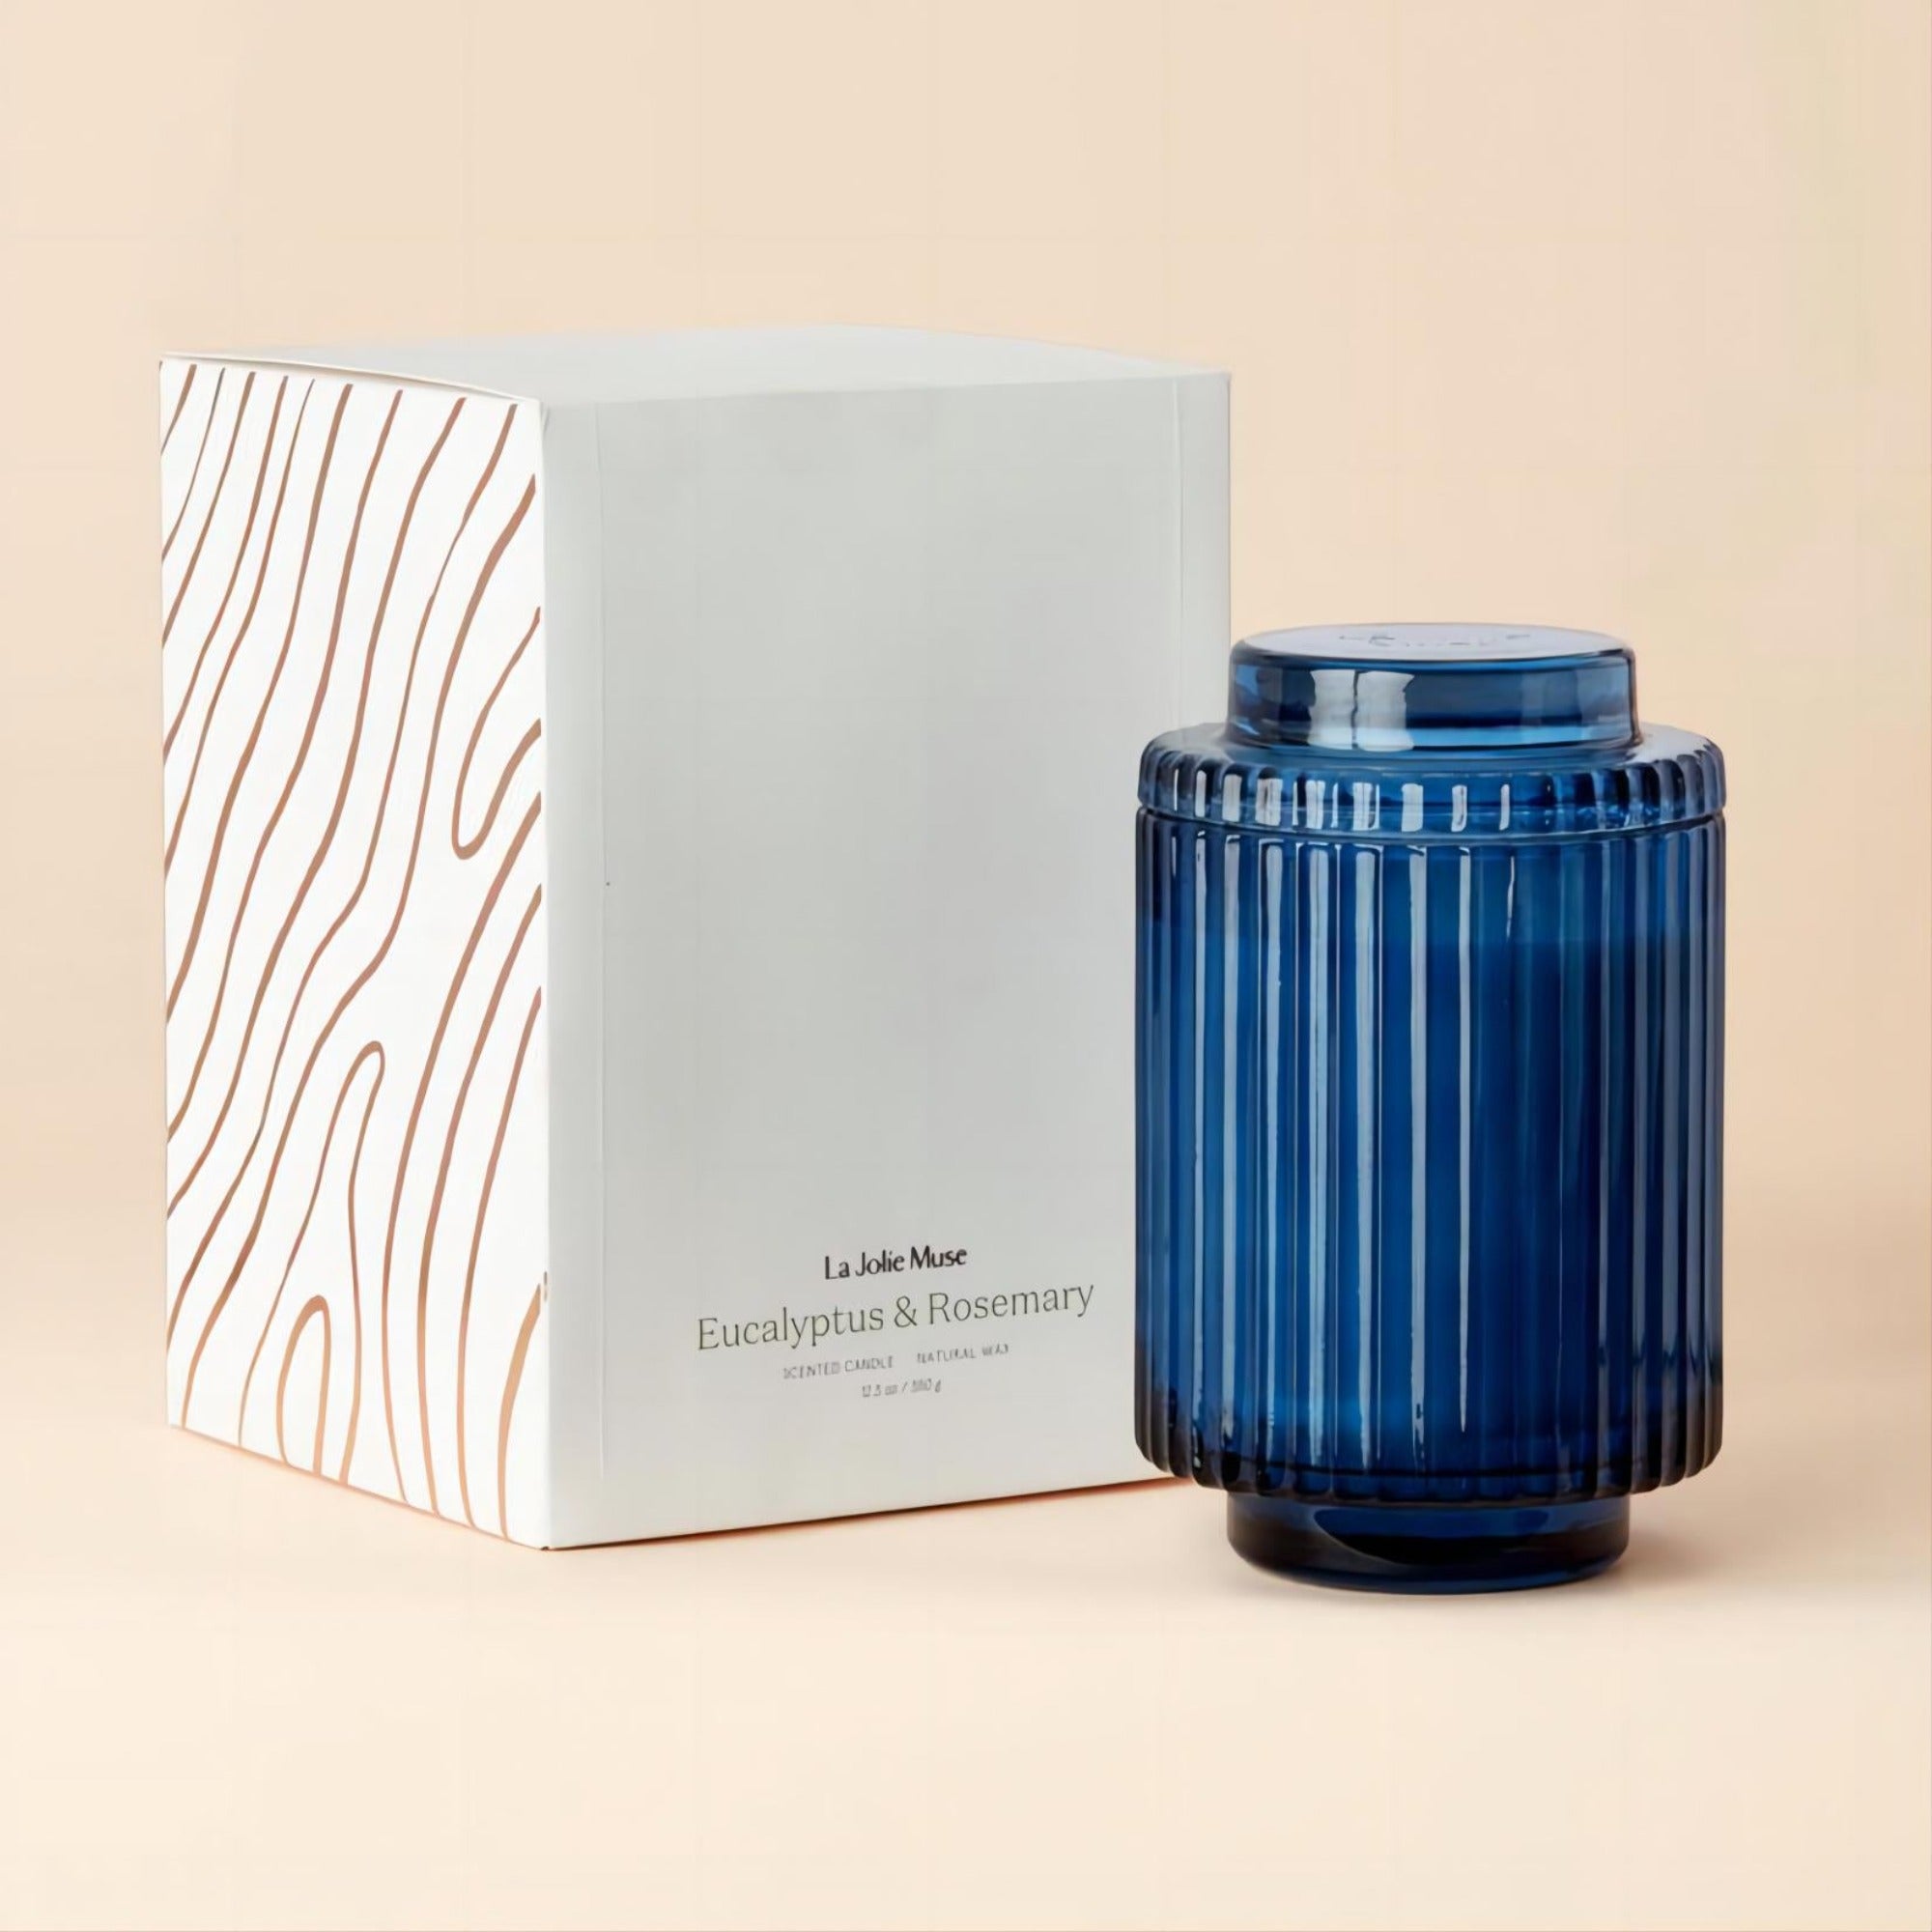 Photo shot of Amélie - Eucalyptus & Rosemary 12.3oz candle positioned on the right side of a plain background, with its outer packaging box placed to the left